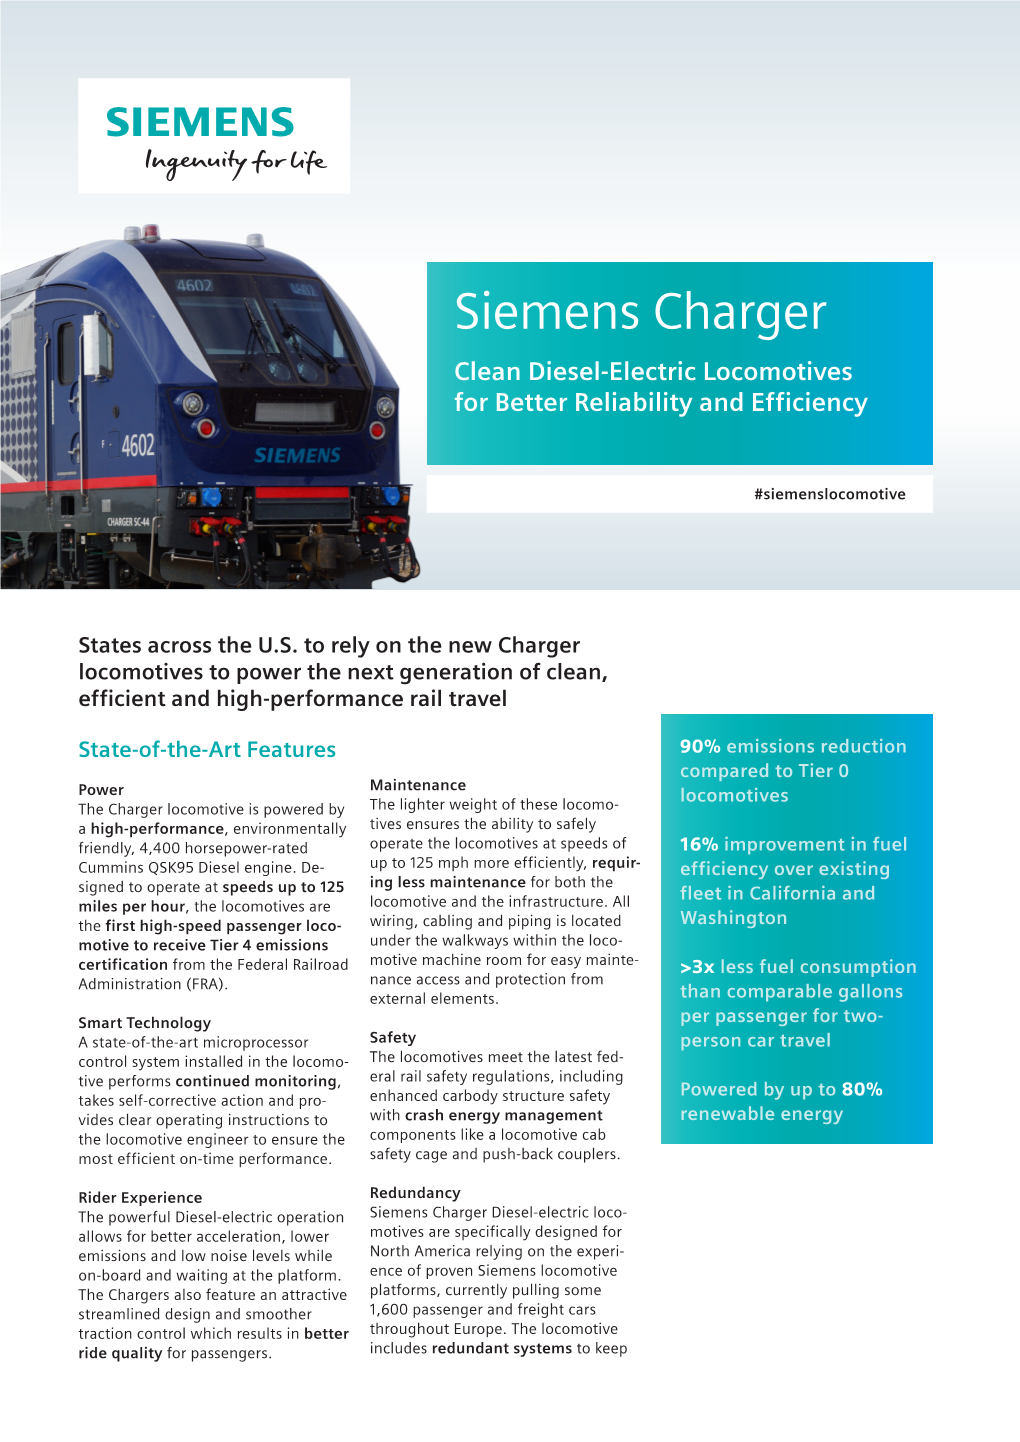 Siemens Charger Clean Diesel-Electric Locomotives for Better Reliability and Efficiency